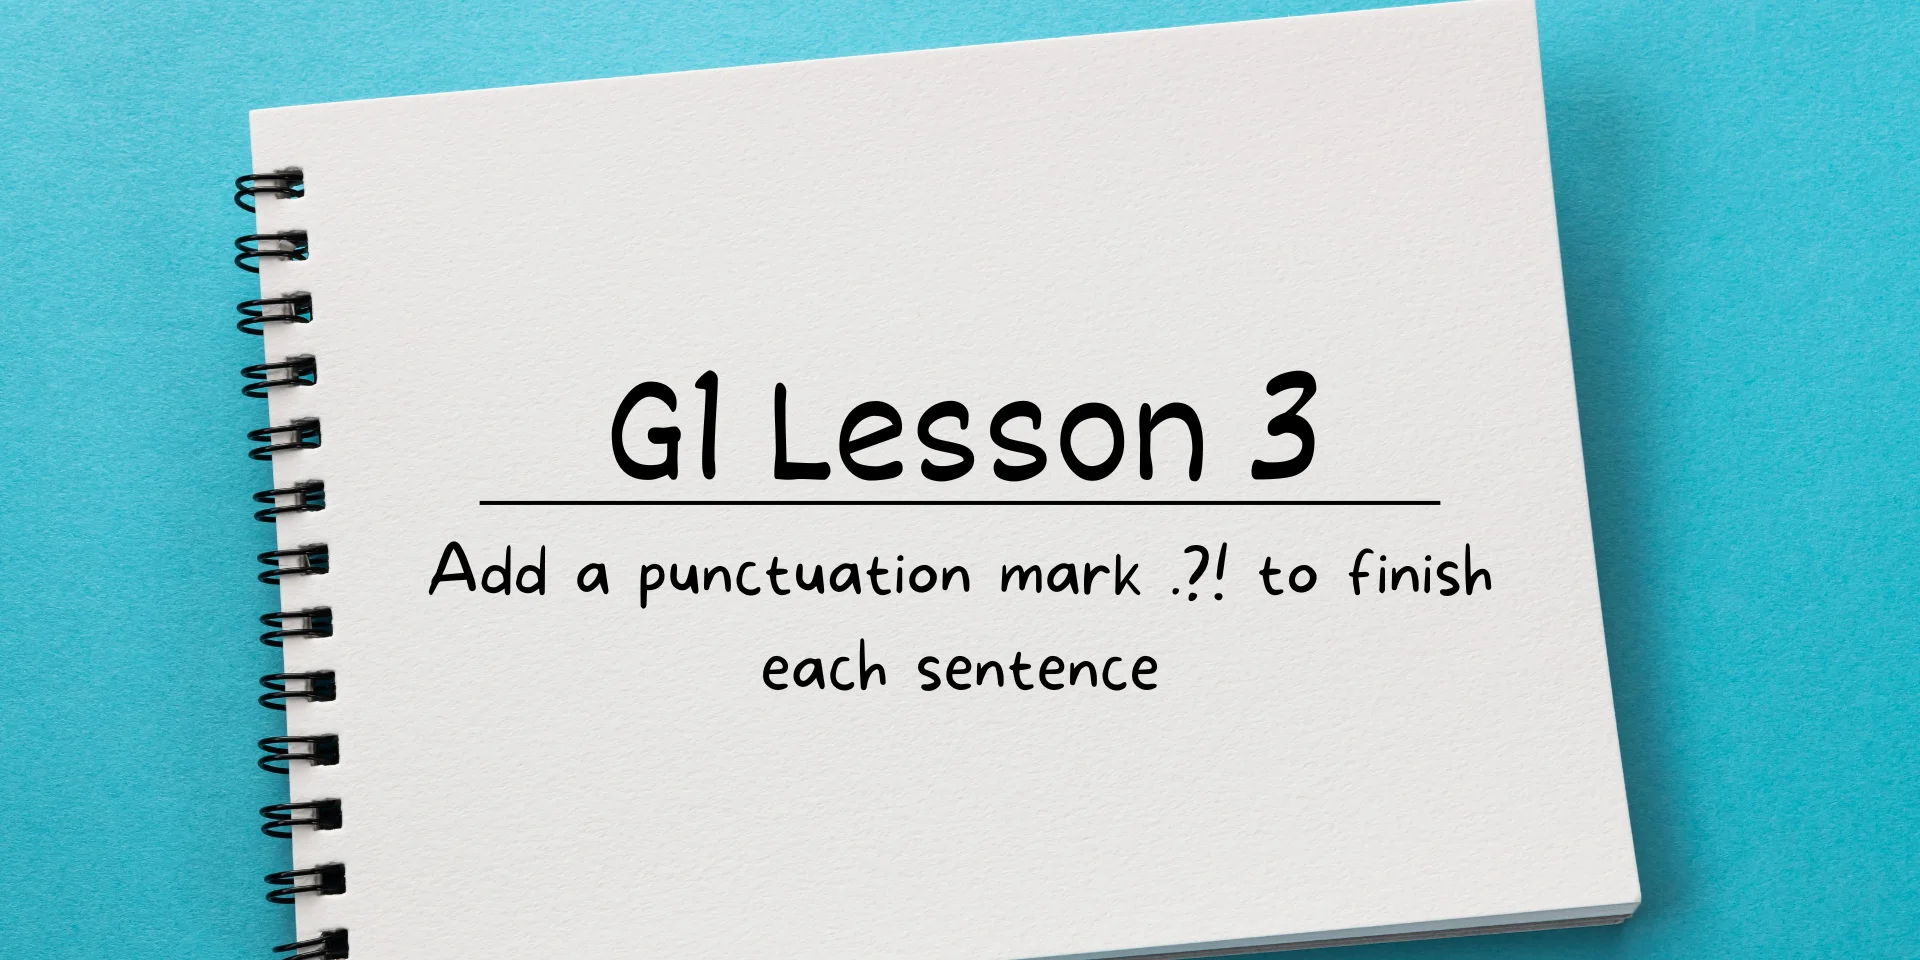 G1 Lesson 3 Add a punctuation mark .?! to finish each sentence